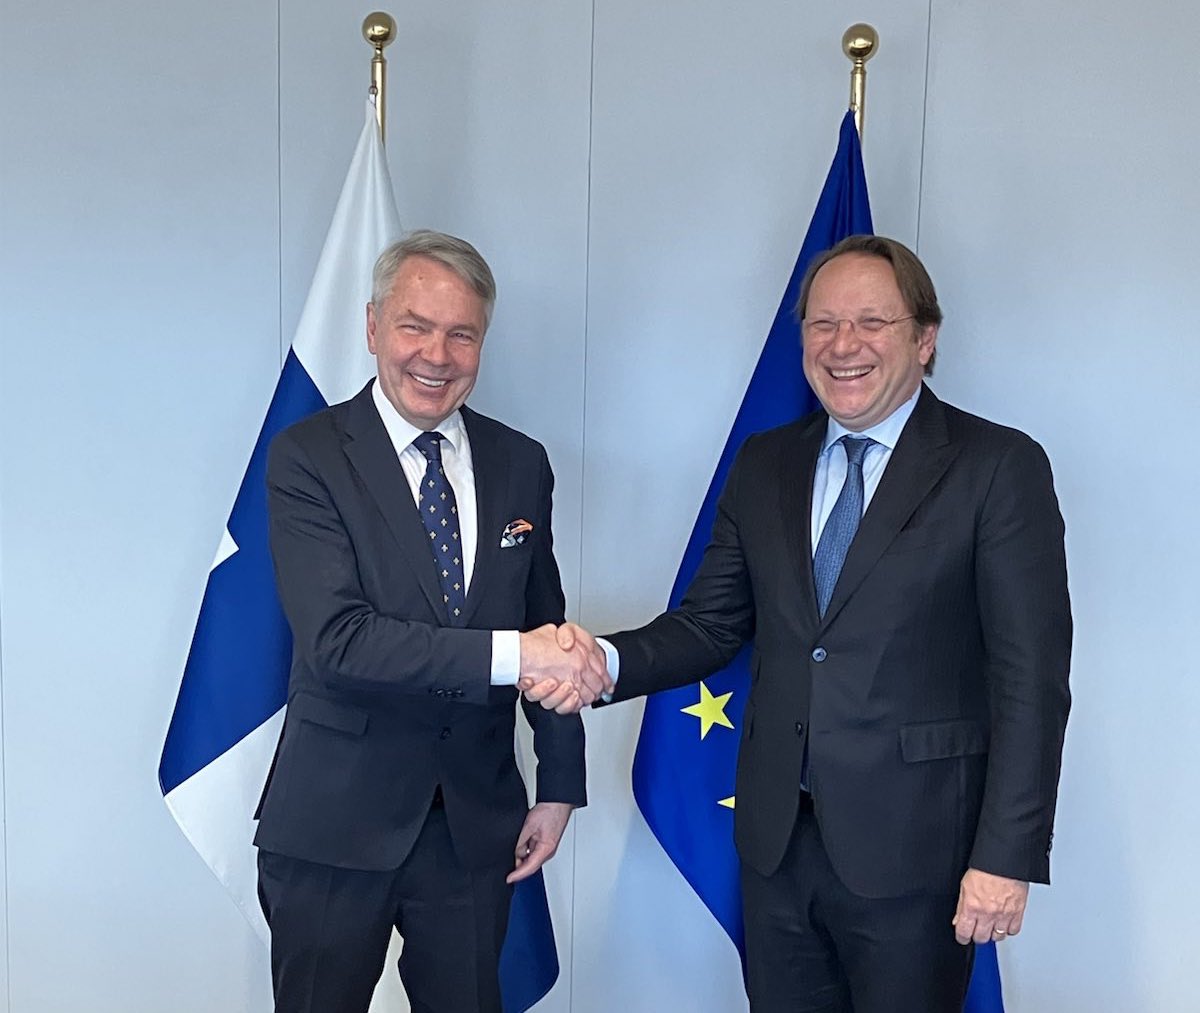 FM @Haavisto: Met with Commissioner @OliverVarhelyi to discuss EU enlargement. Enlargement is a key tool in the European security landscape. 🇫🇮🇪🇺